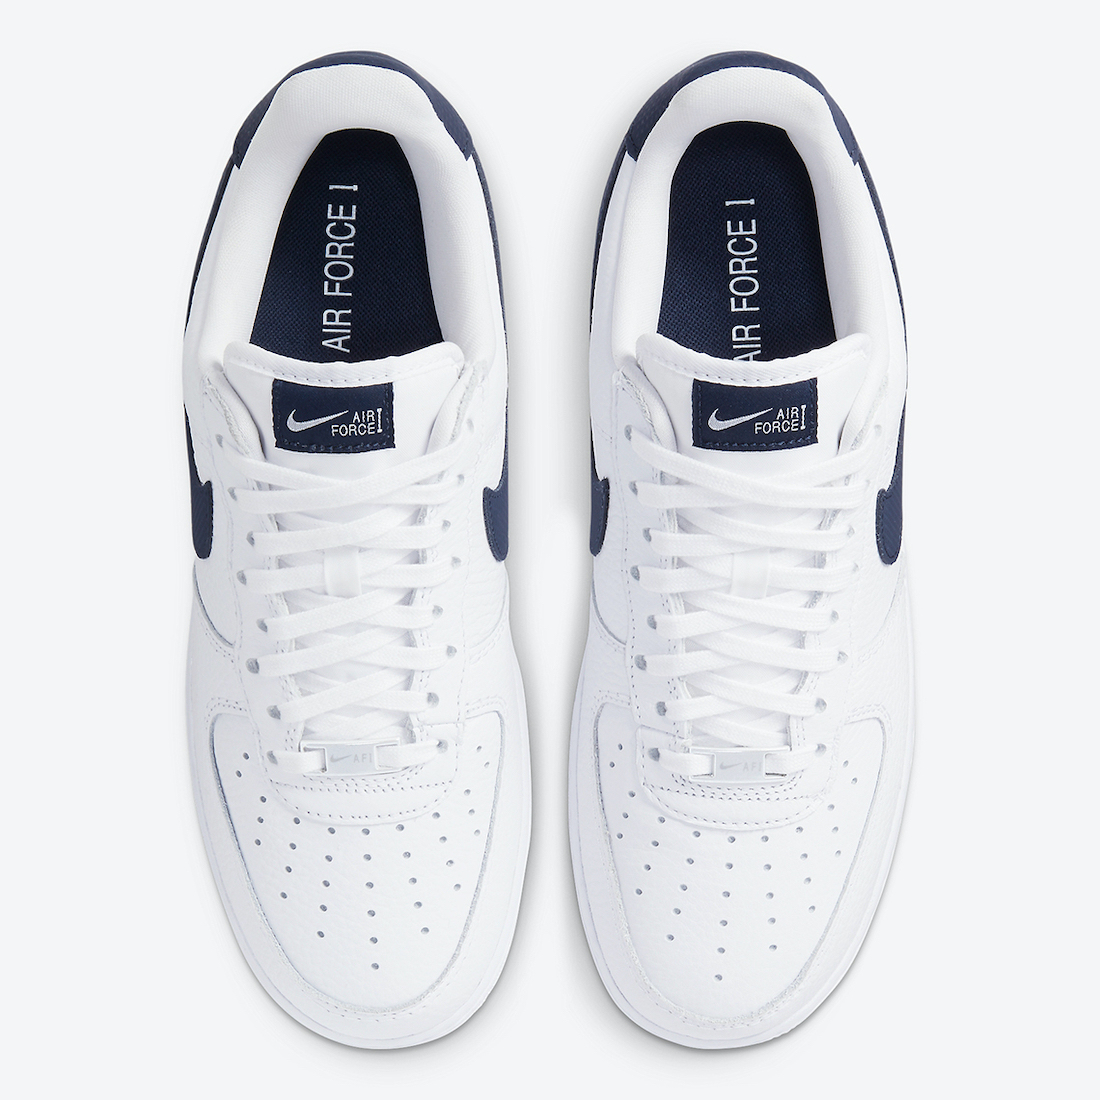 Nike Air Force 1 Craft White Obsidian CT2317-100 Release Date